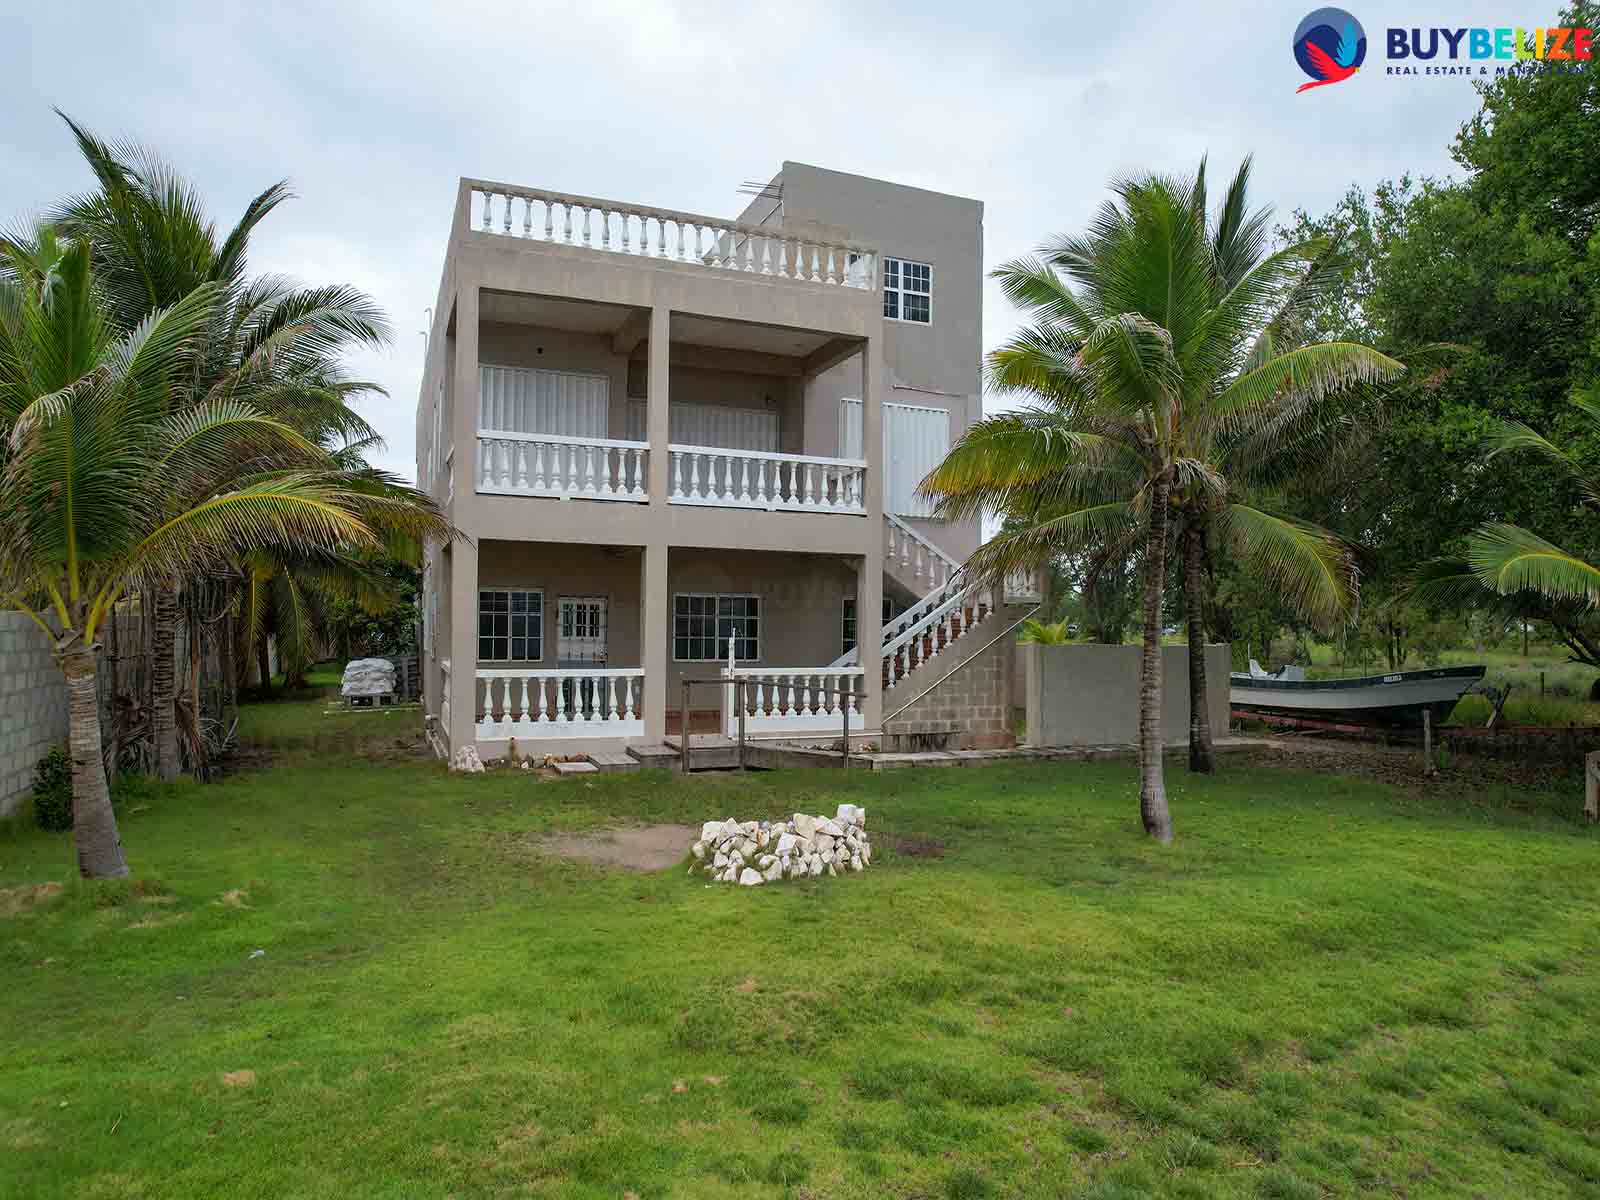 Beach front Apartment Complex for sale in Belize City